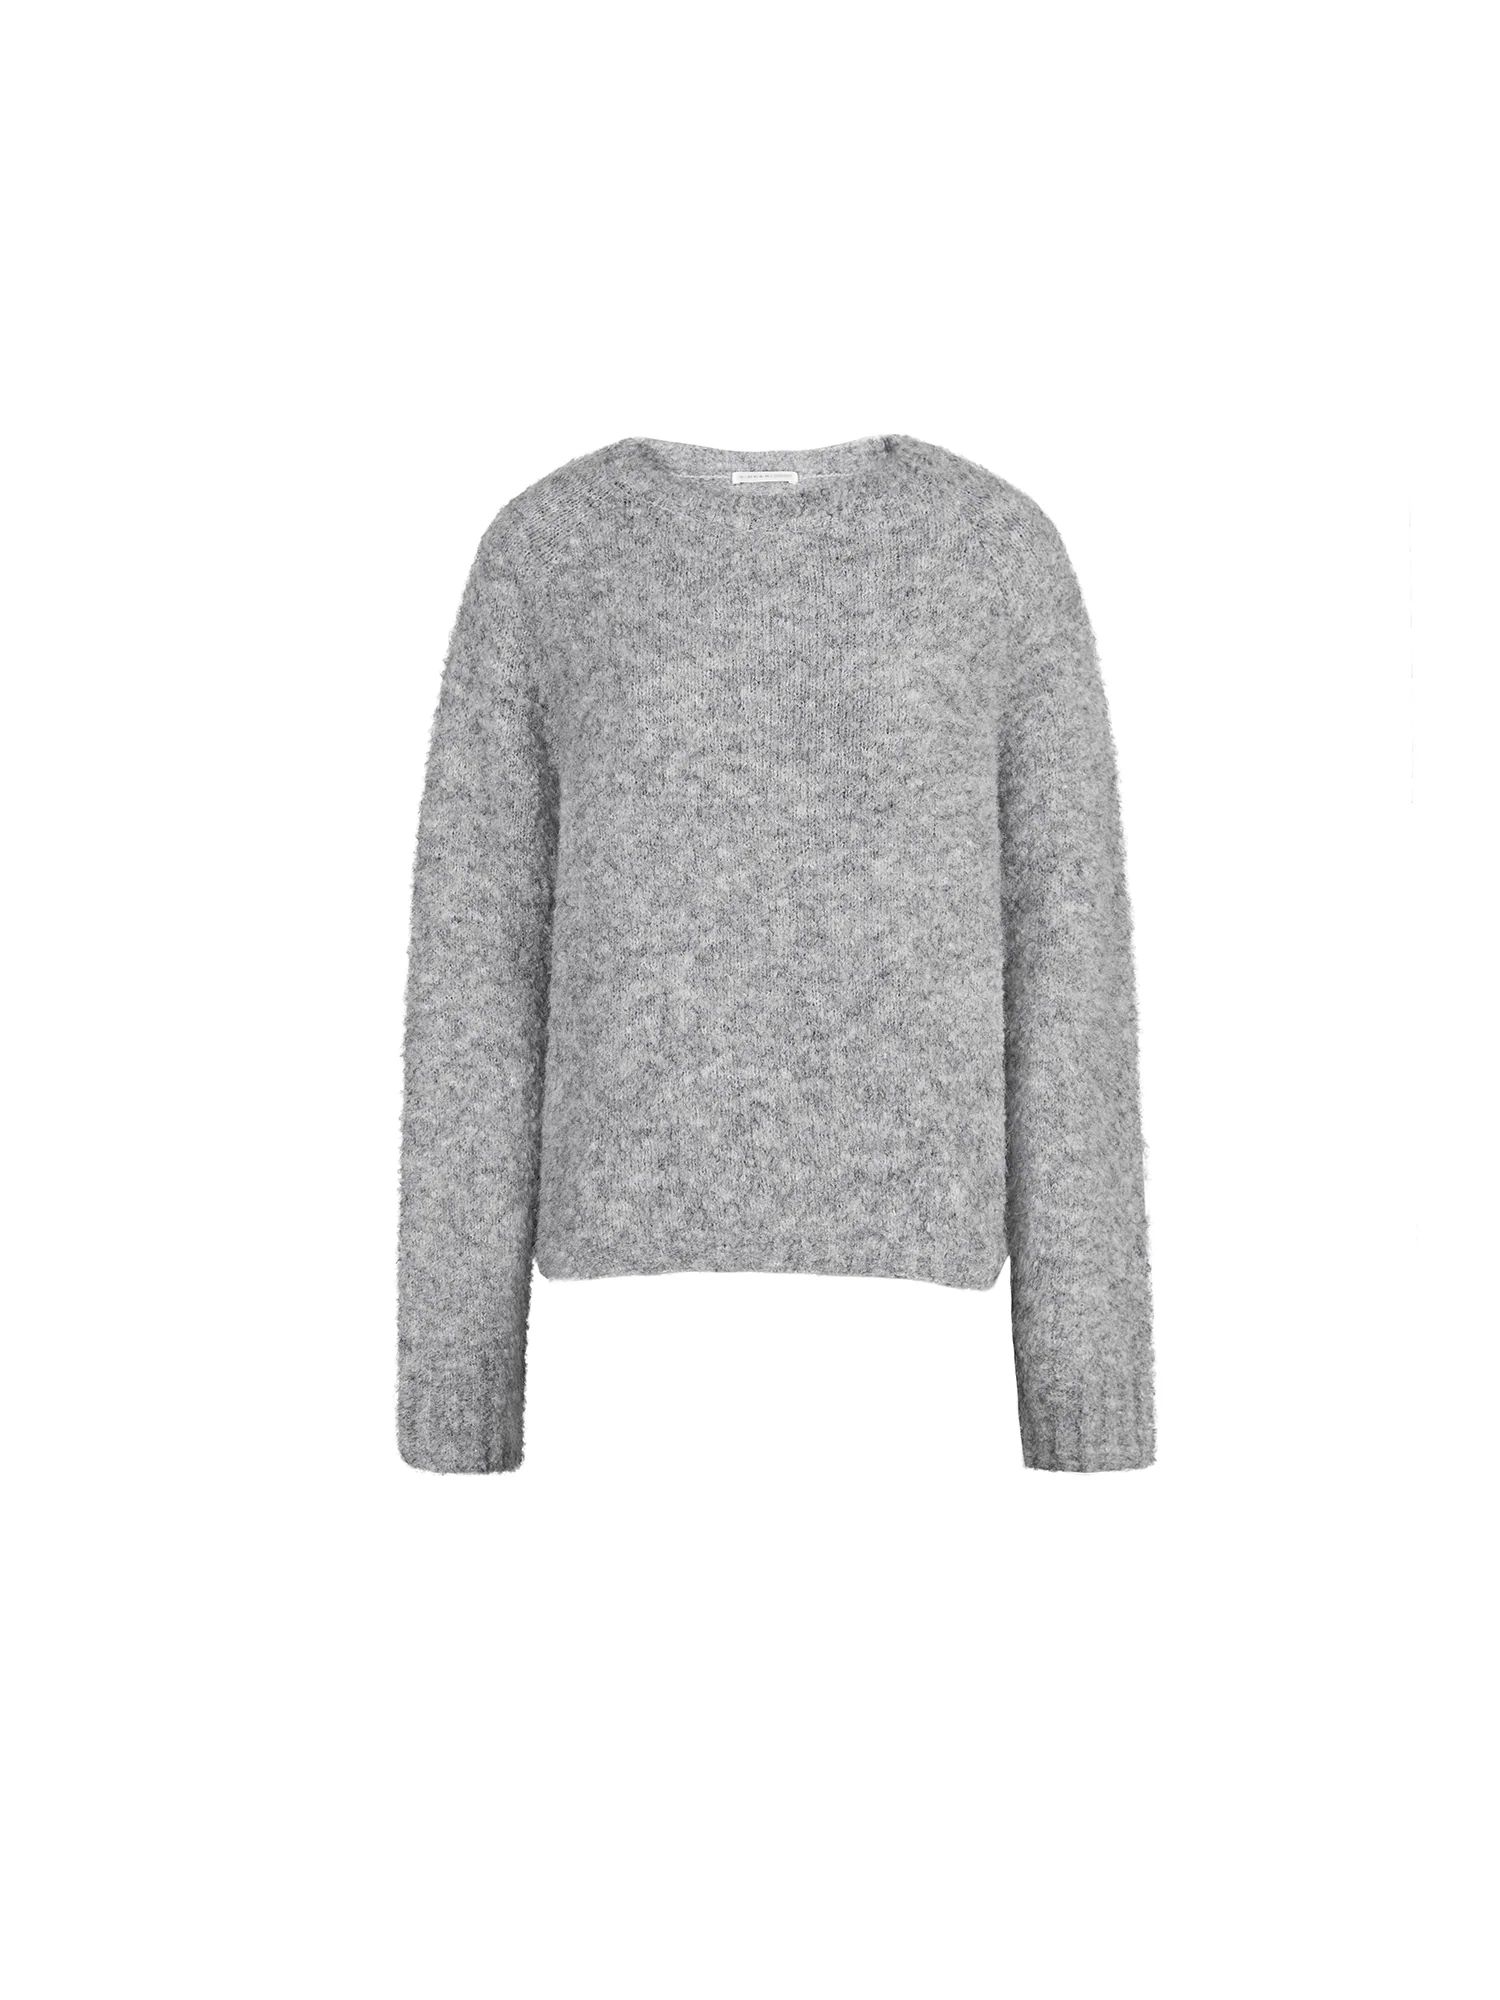 Casual Round Neck Textured Wool Thick Gray Sweater | SDEER